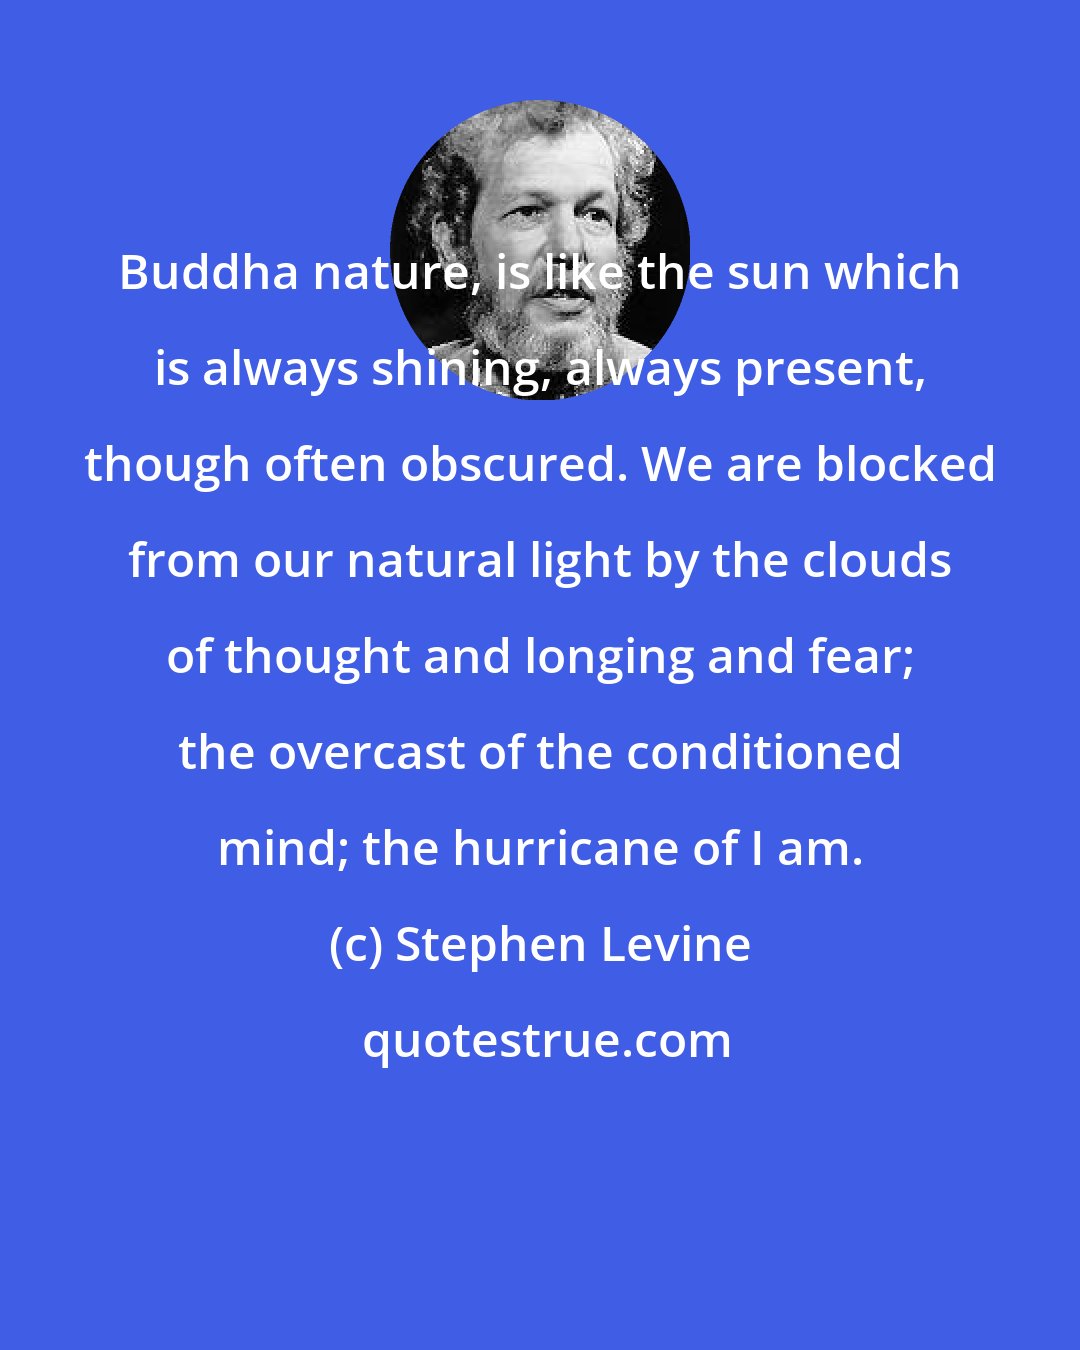 Stephen Levine: Buddha nature, is like the sun which is always shining, always present, though often obscured. We are blocked from our natural light by the clouds of thought and longing and fear; the overcast of the conditioned mind; the hurricane of I am.